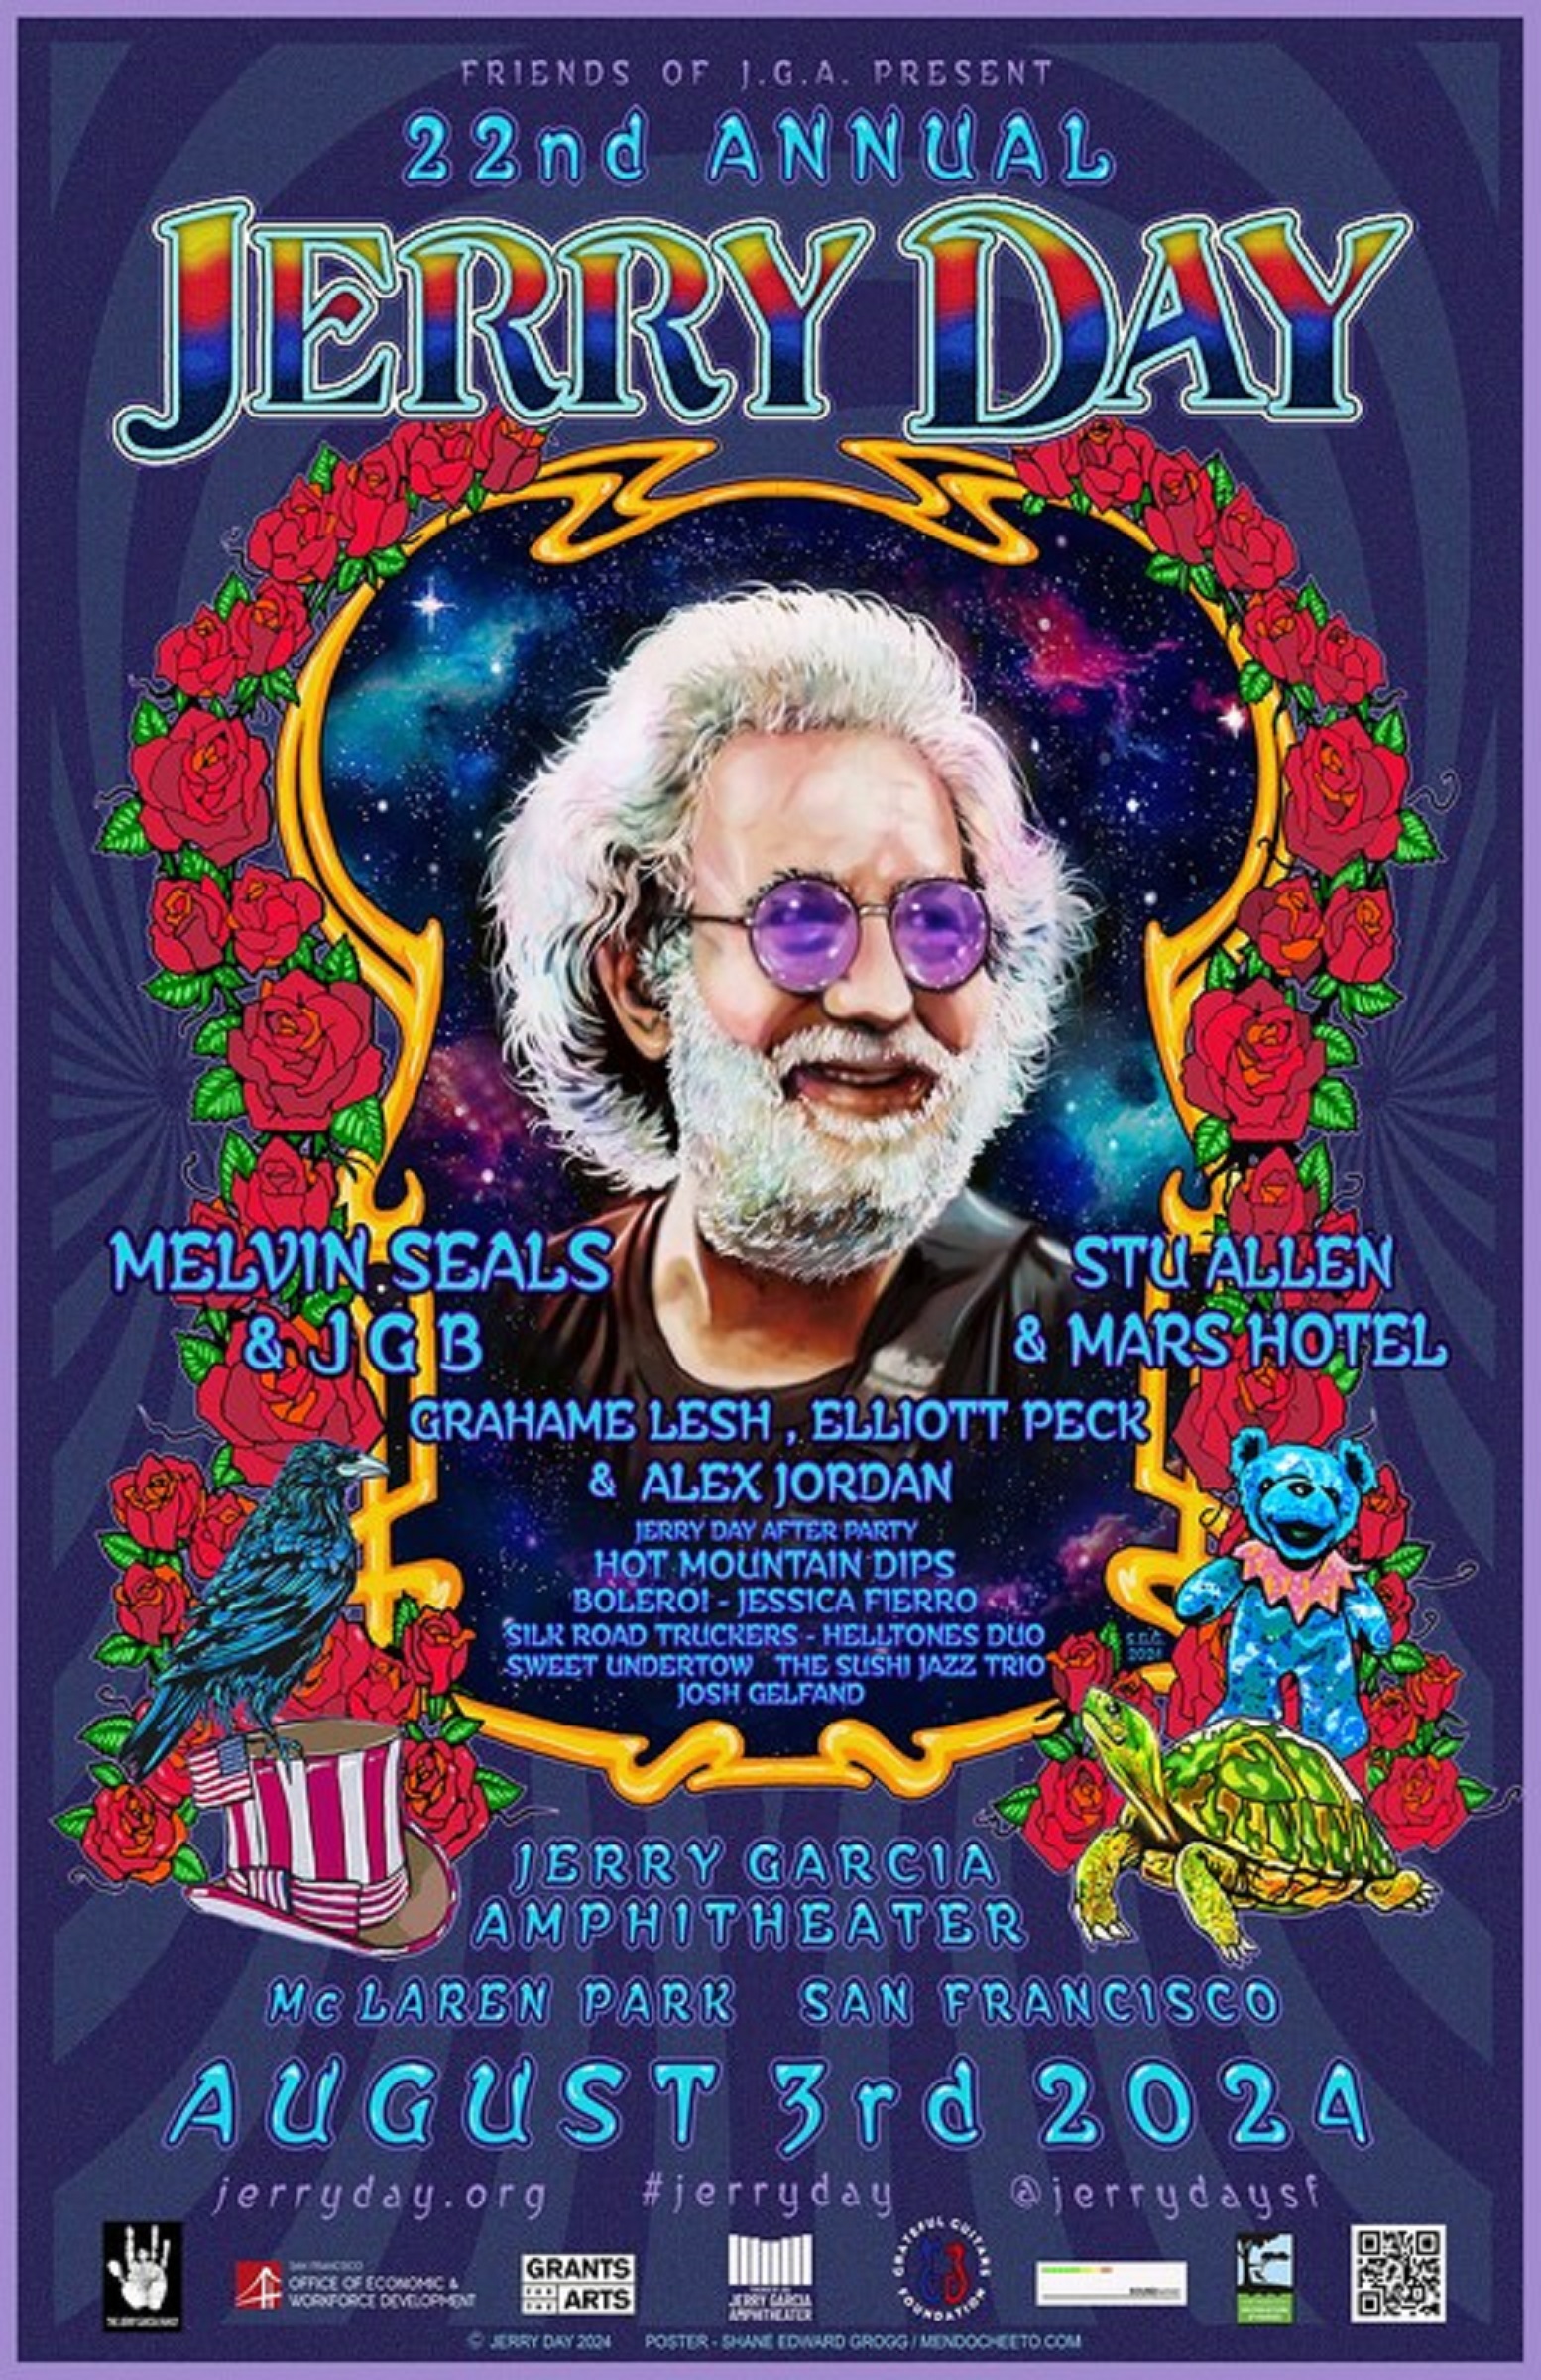 Join the 22nd Jerry Day Celebration at McLaren Park's Jerry Garcia Amphitheater